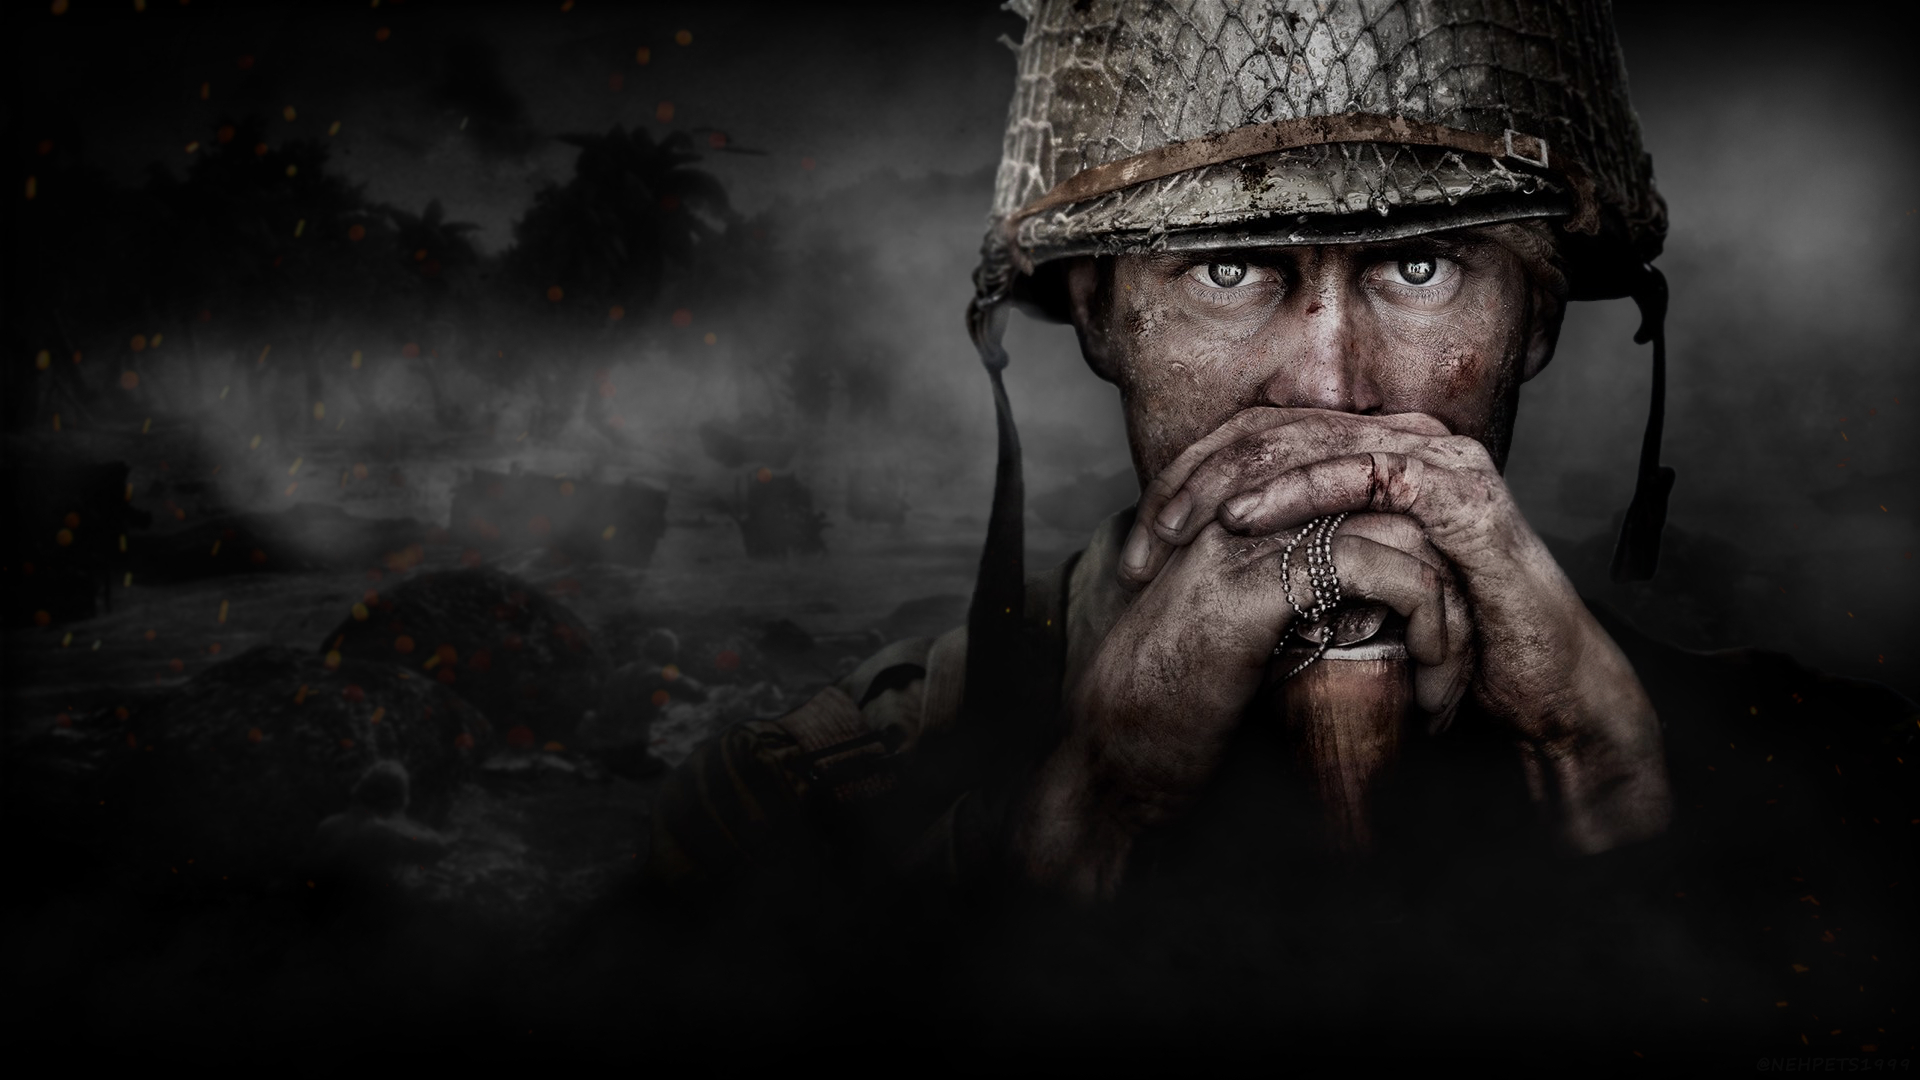 1920x1080 A little WWII wallpaper I made from the reveal image : r/WWII